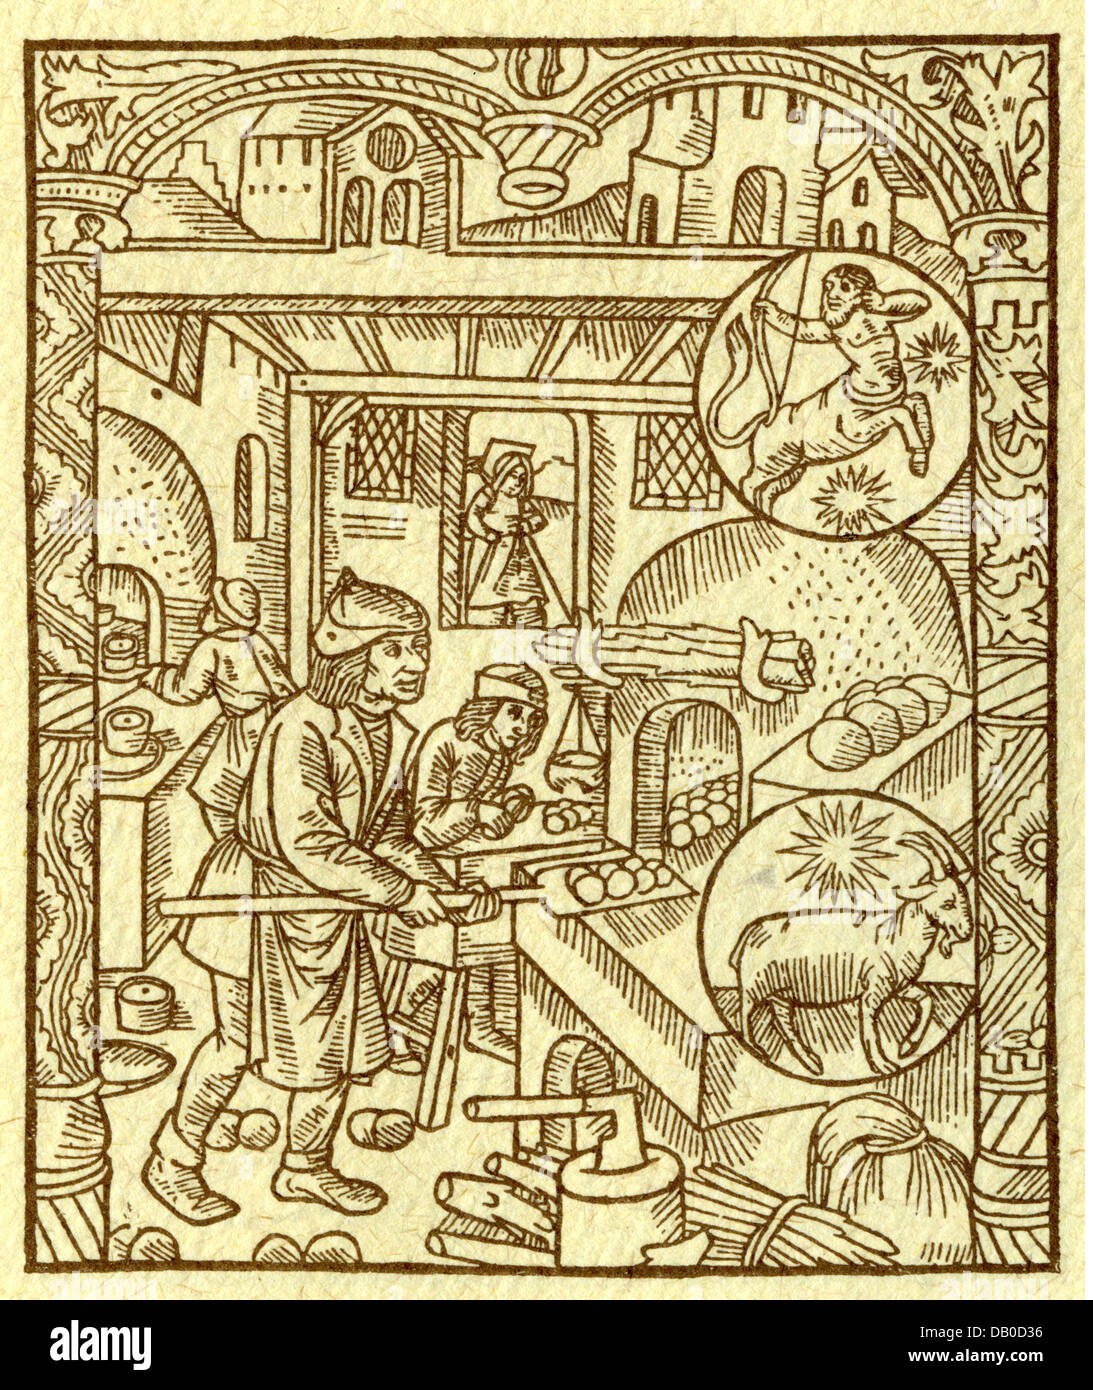 calendarium / calendars, labours of the months, December, woodcut, France, 15th century, Capricorn, Sagittarius, sign, zodiac, month image, months, people, Middle Ages, historic, historical, winter, wintertime, wintertide, baker, bakers, bread, breads, bake, baking, bake, baking, oven, ovens, furnace, medieval, Additional-Rights-Clearences-Not Available Stock Photo